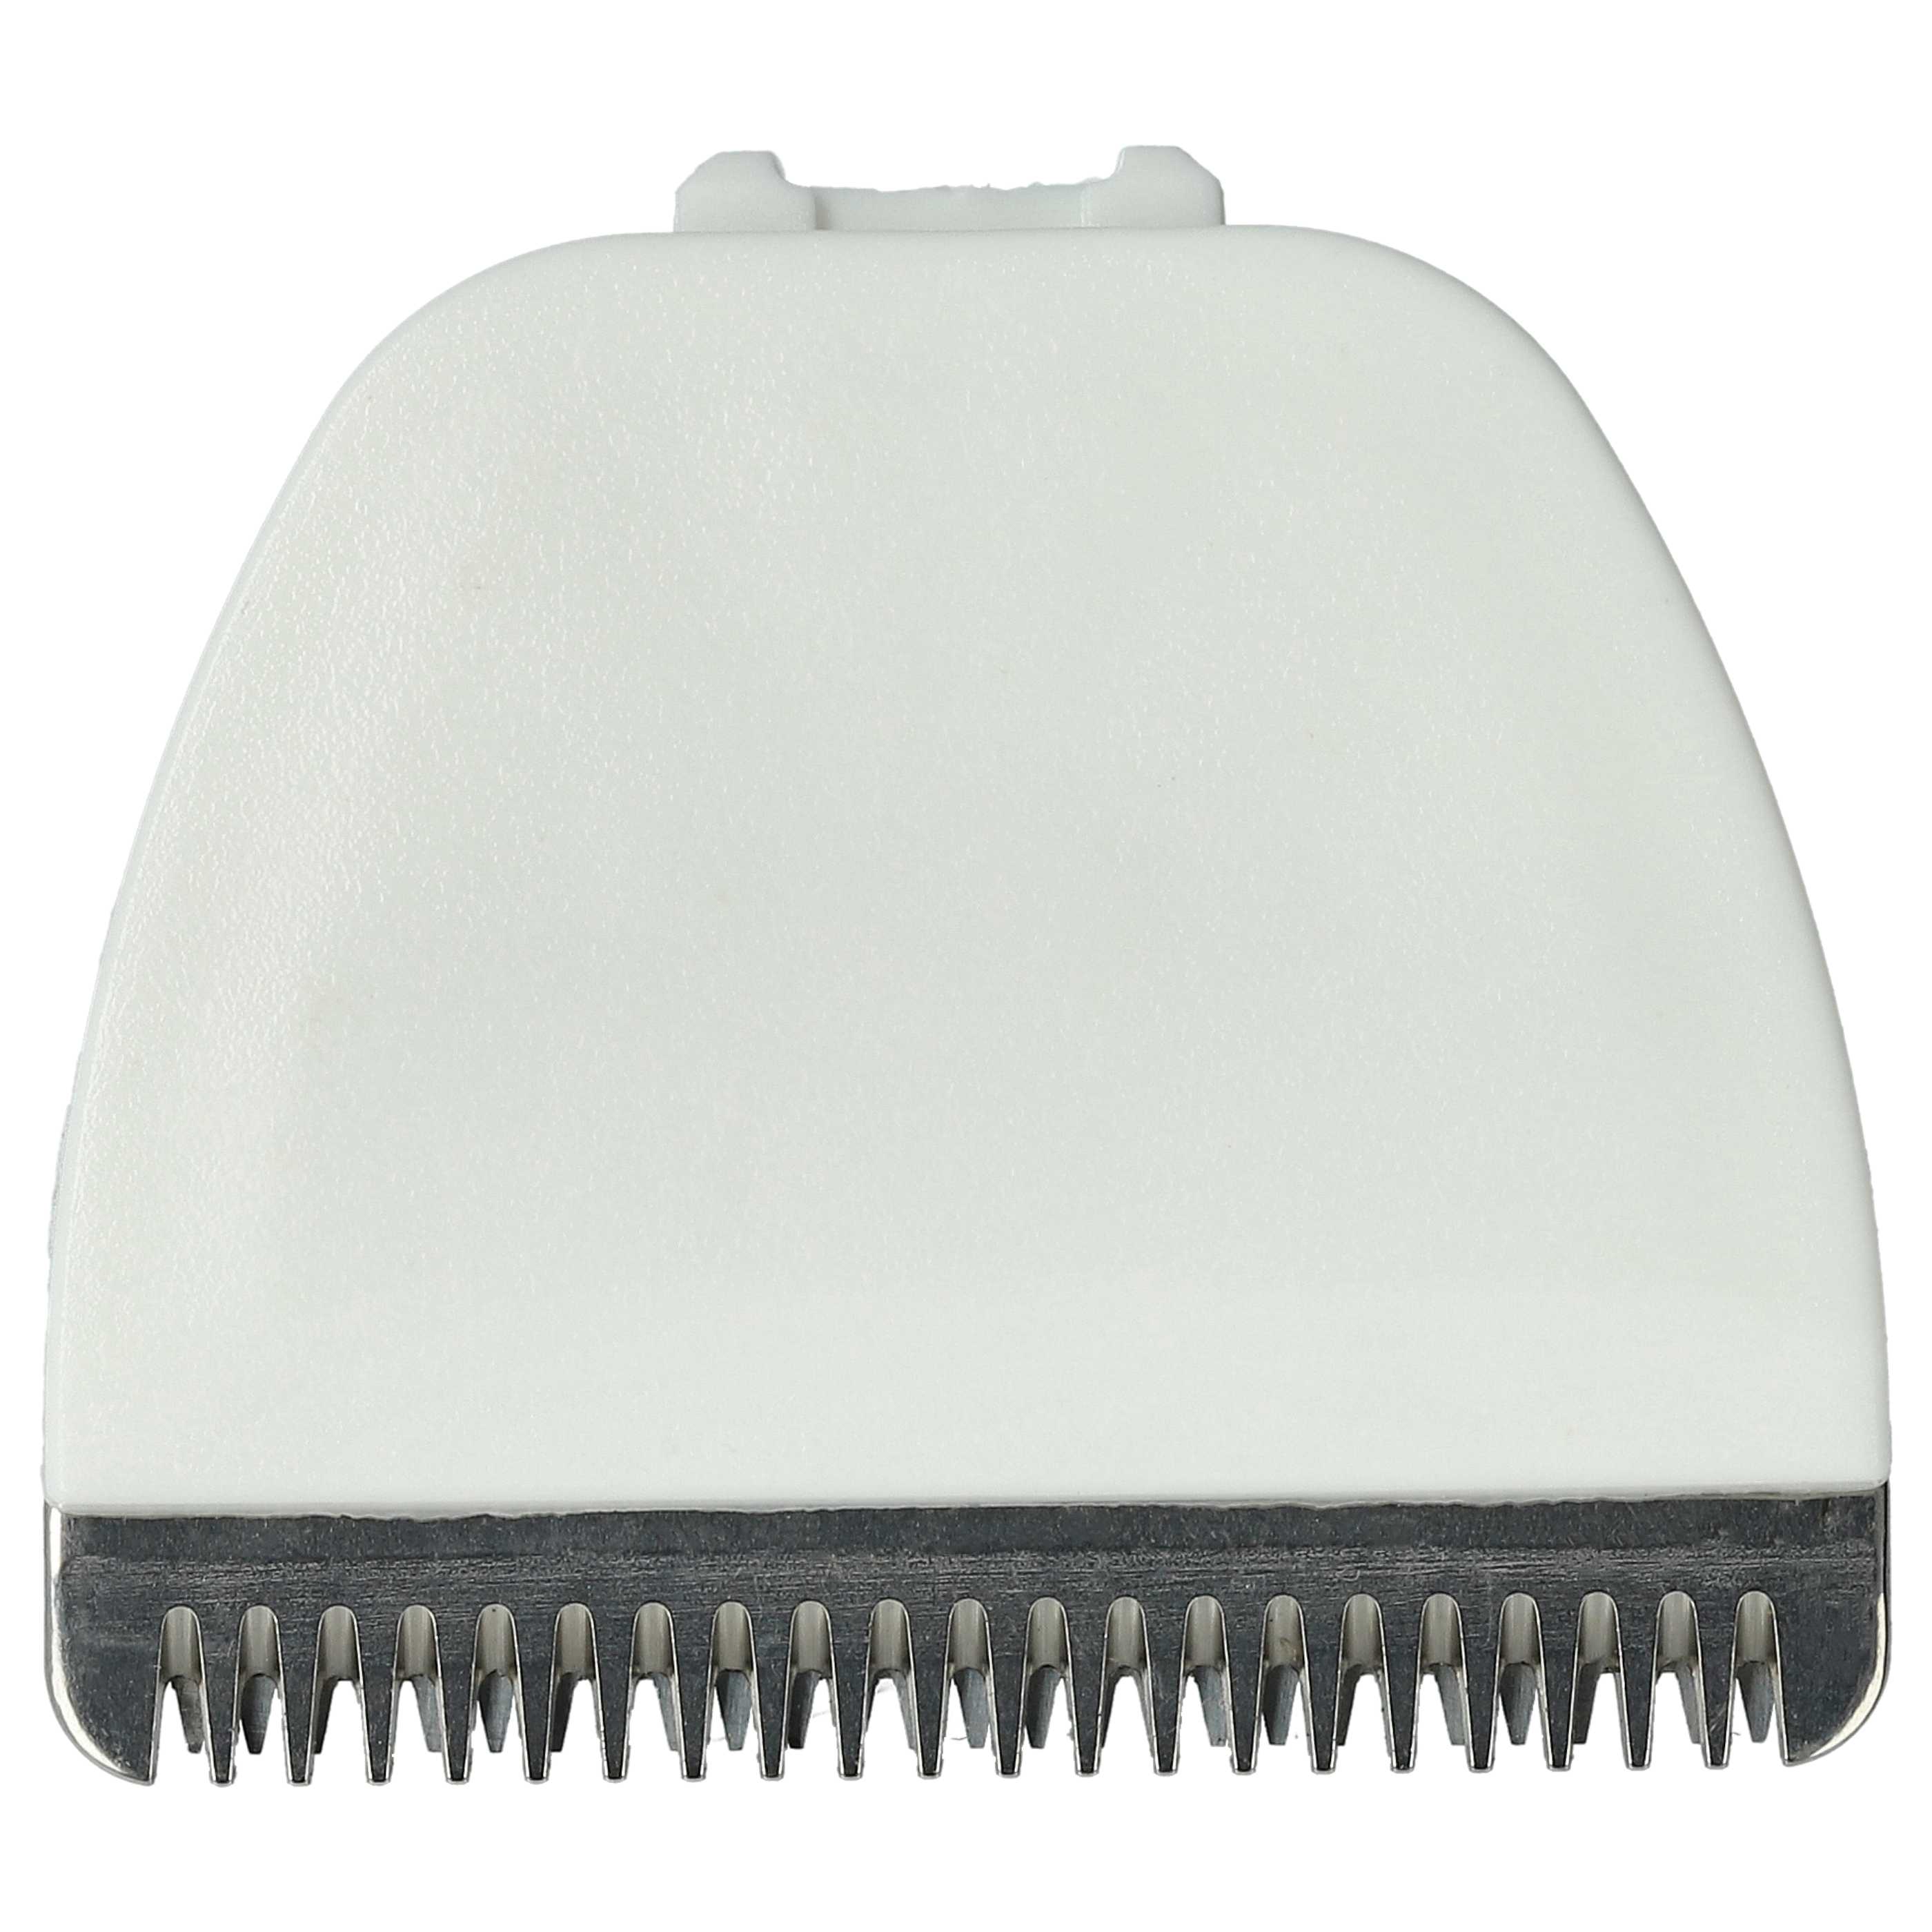 Shaving Head as Replacement for Panasonic WER9714Y, WER9714 for Panasonic Razors - Electric Razor Parts